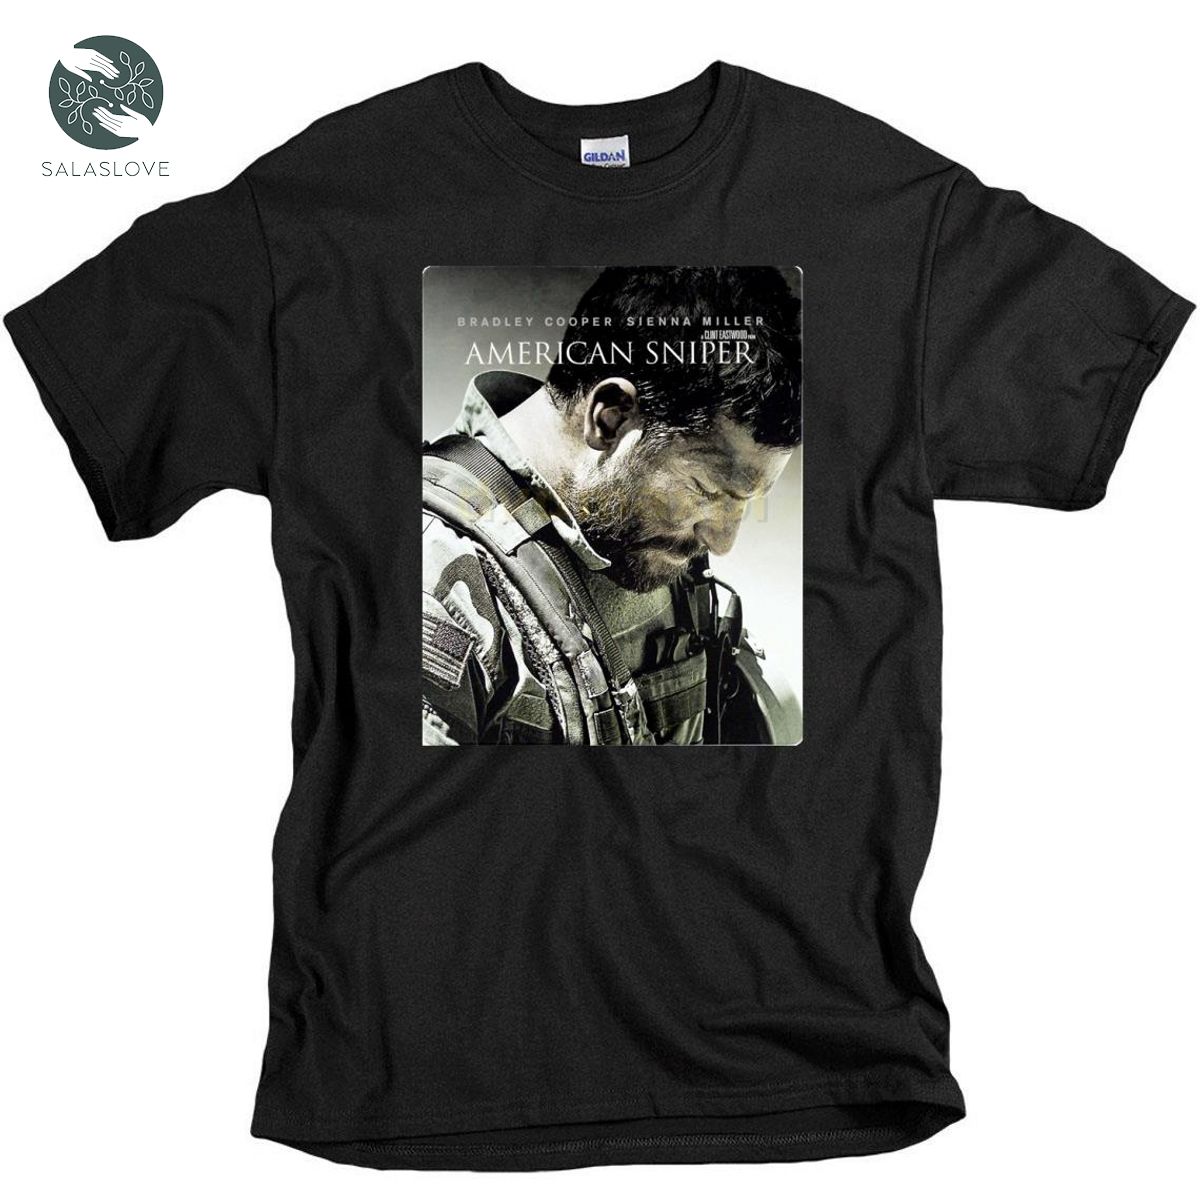 Bradley Cooper With new film American Sniper T-shirt